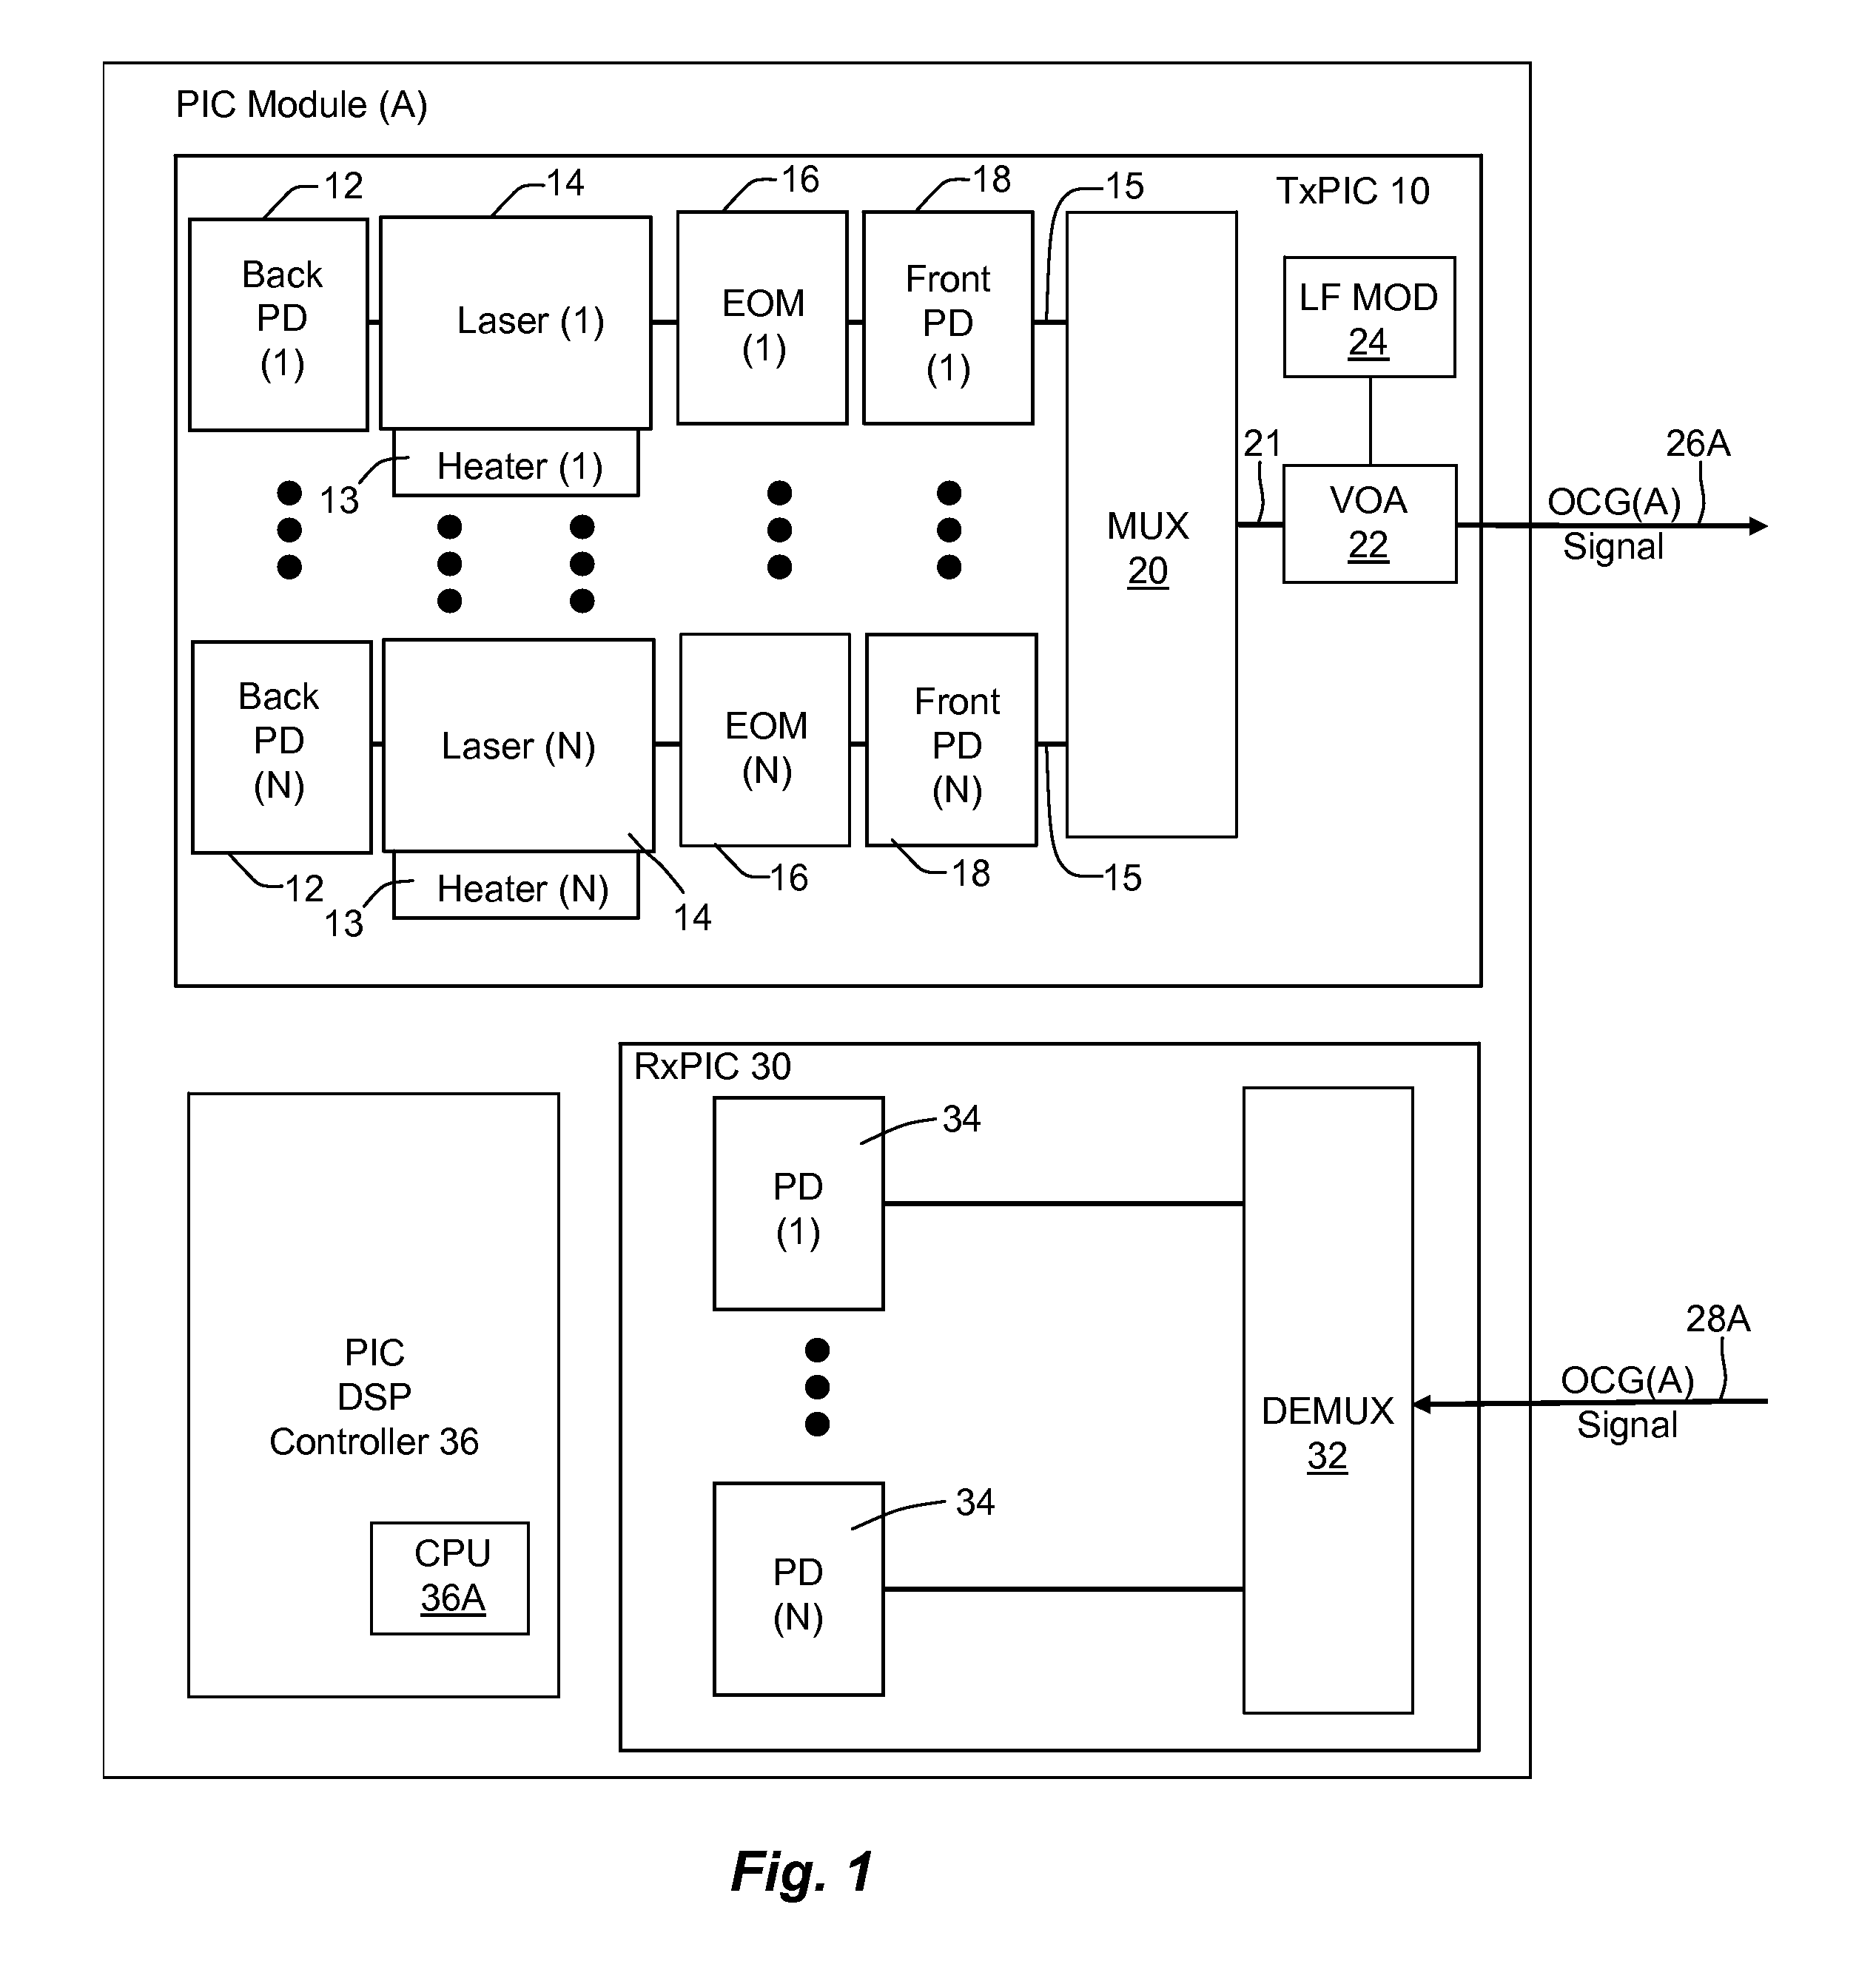 Optical autodiscovery for automated logical and physical connectivity check between optical modules